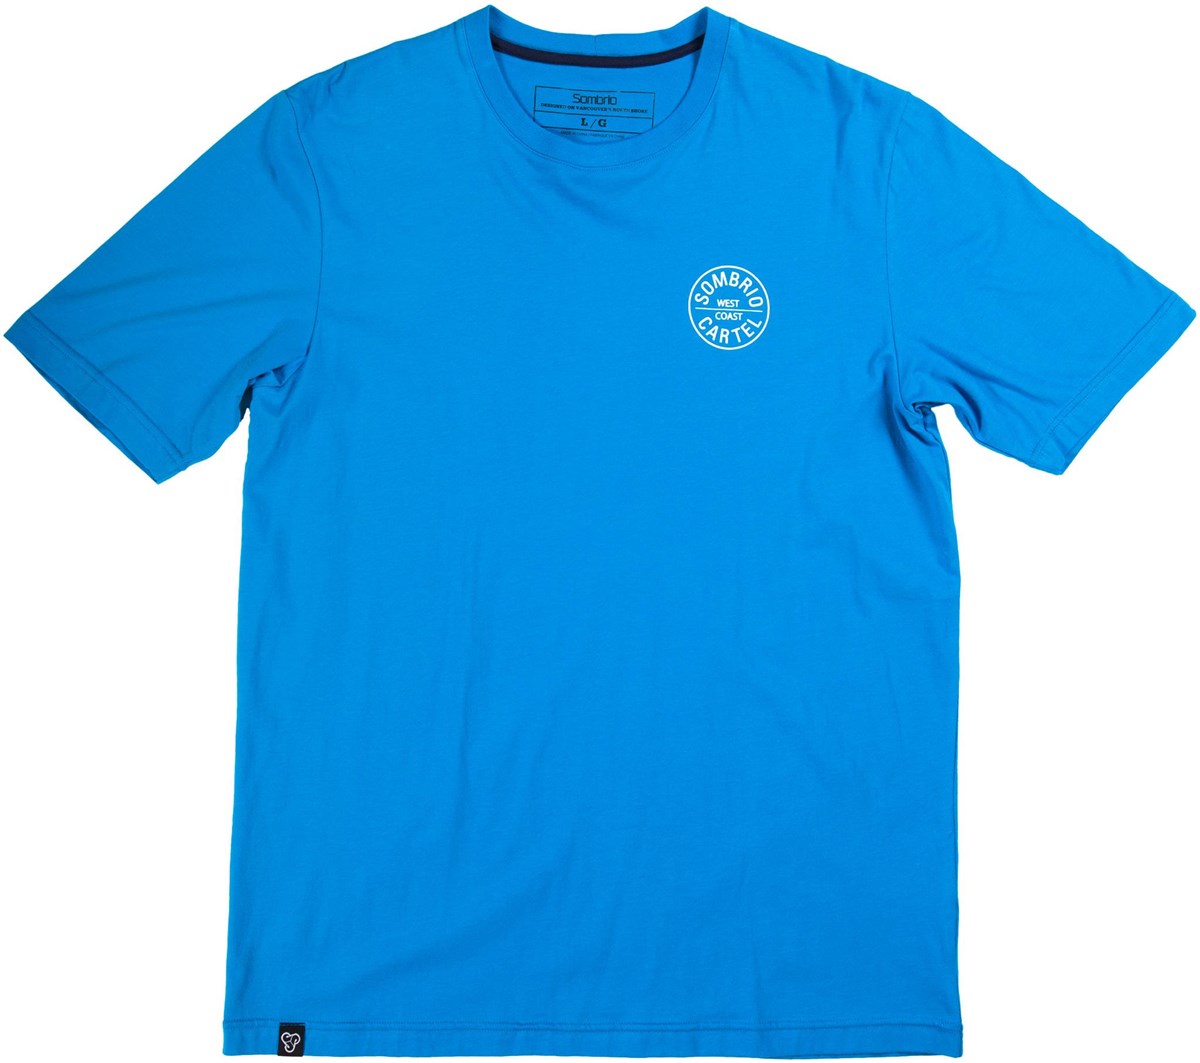 Sombrio Badge Tee SS16 product image